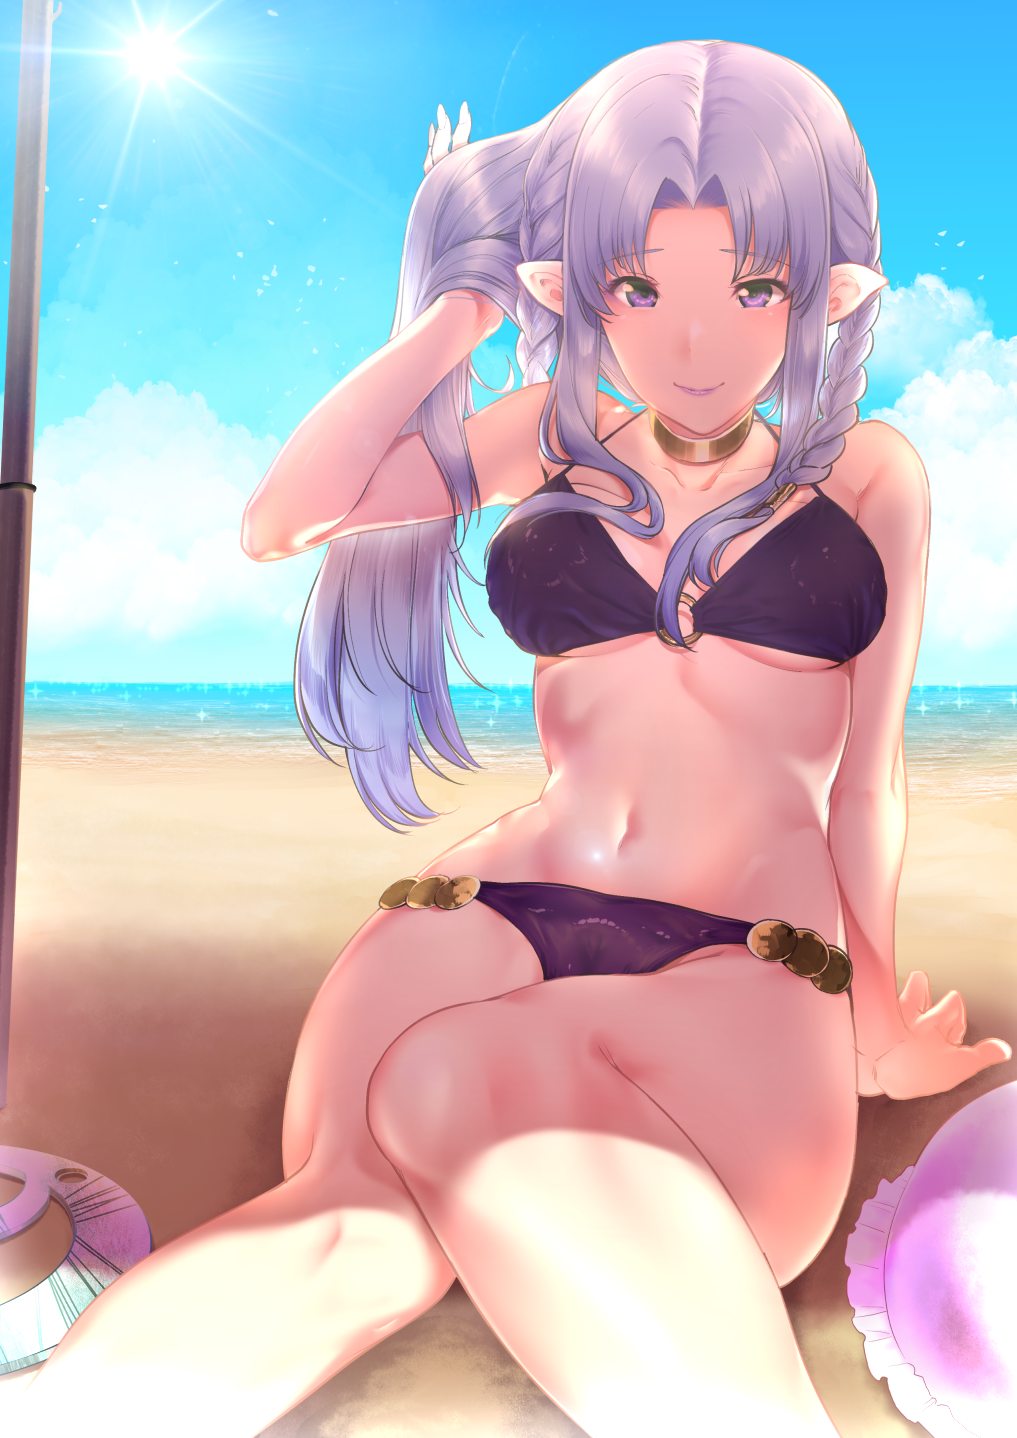 Anime 1017x1438 Fate series Fate/Stay Night Fate/Stay Night: Unlimited Blade Works fate/stay night: heaven's feel big boobs underboob women on beach thighs the gap belly button purple bikini beach umbrella looking at viewer bangs touching hair ocean view braids glutes sitting pointy ears anime girls Caster (Fate/Stay Night) purple hair purple lipstick long hair purple eyes smiling belly 2D portrait display anime arm support choker hands in hair clouds summer dappled sunlight ecchi fan art Hisayaki Kyuu Pixiv